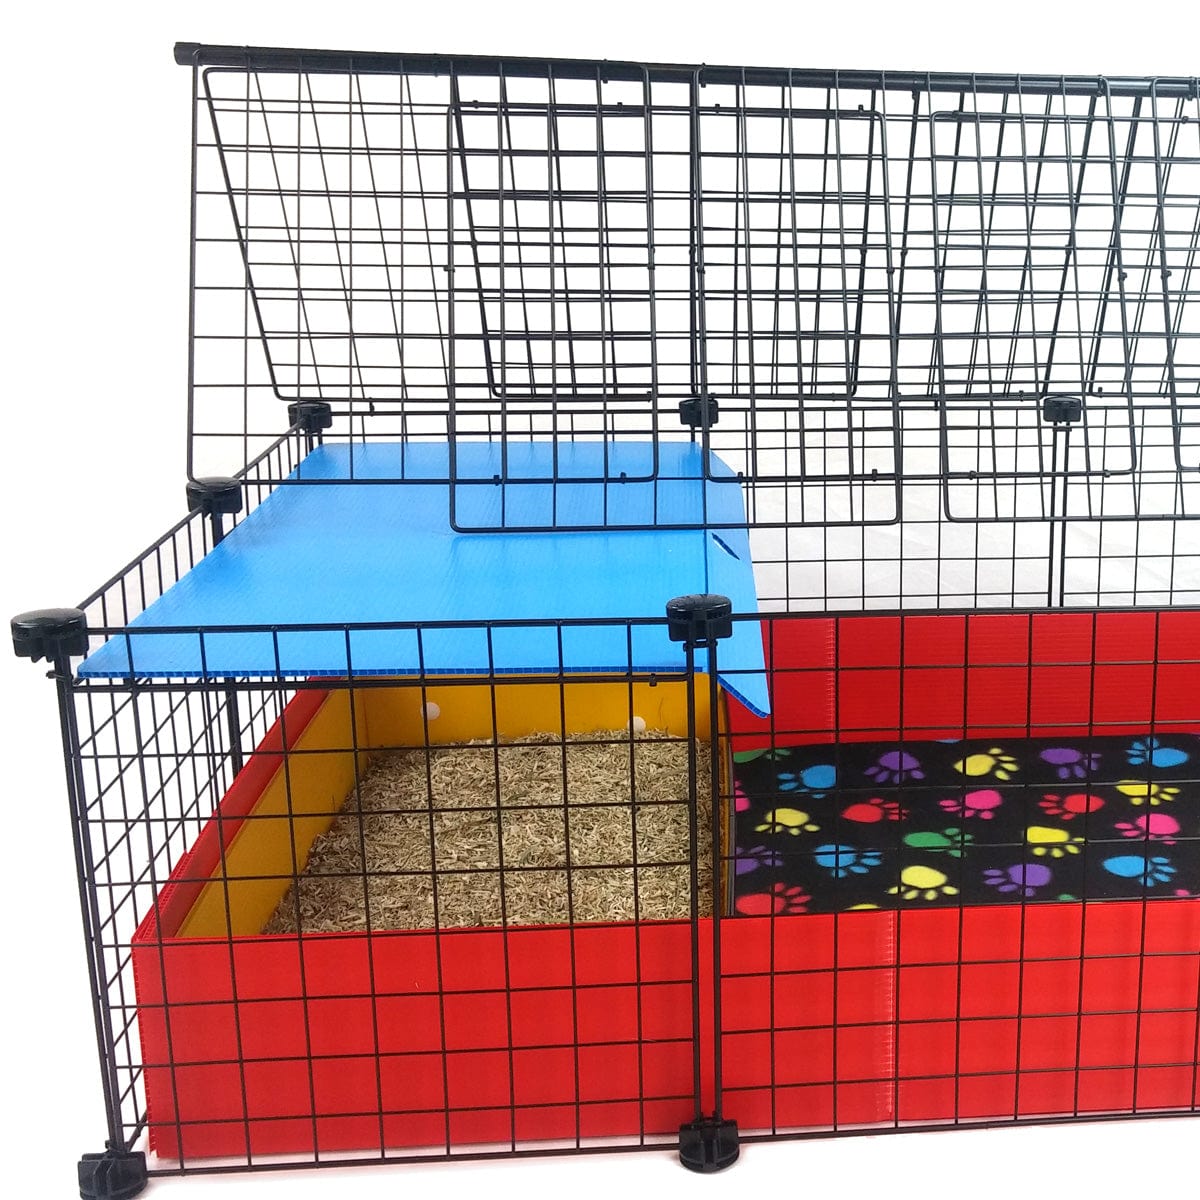 Light blue undercover canopy in a covered red C&C guinea pig cage